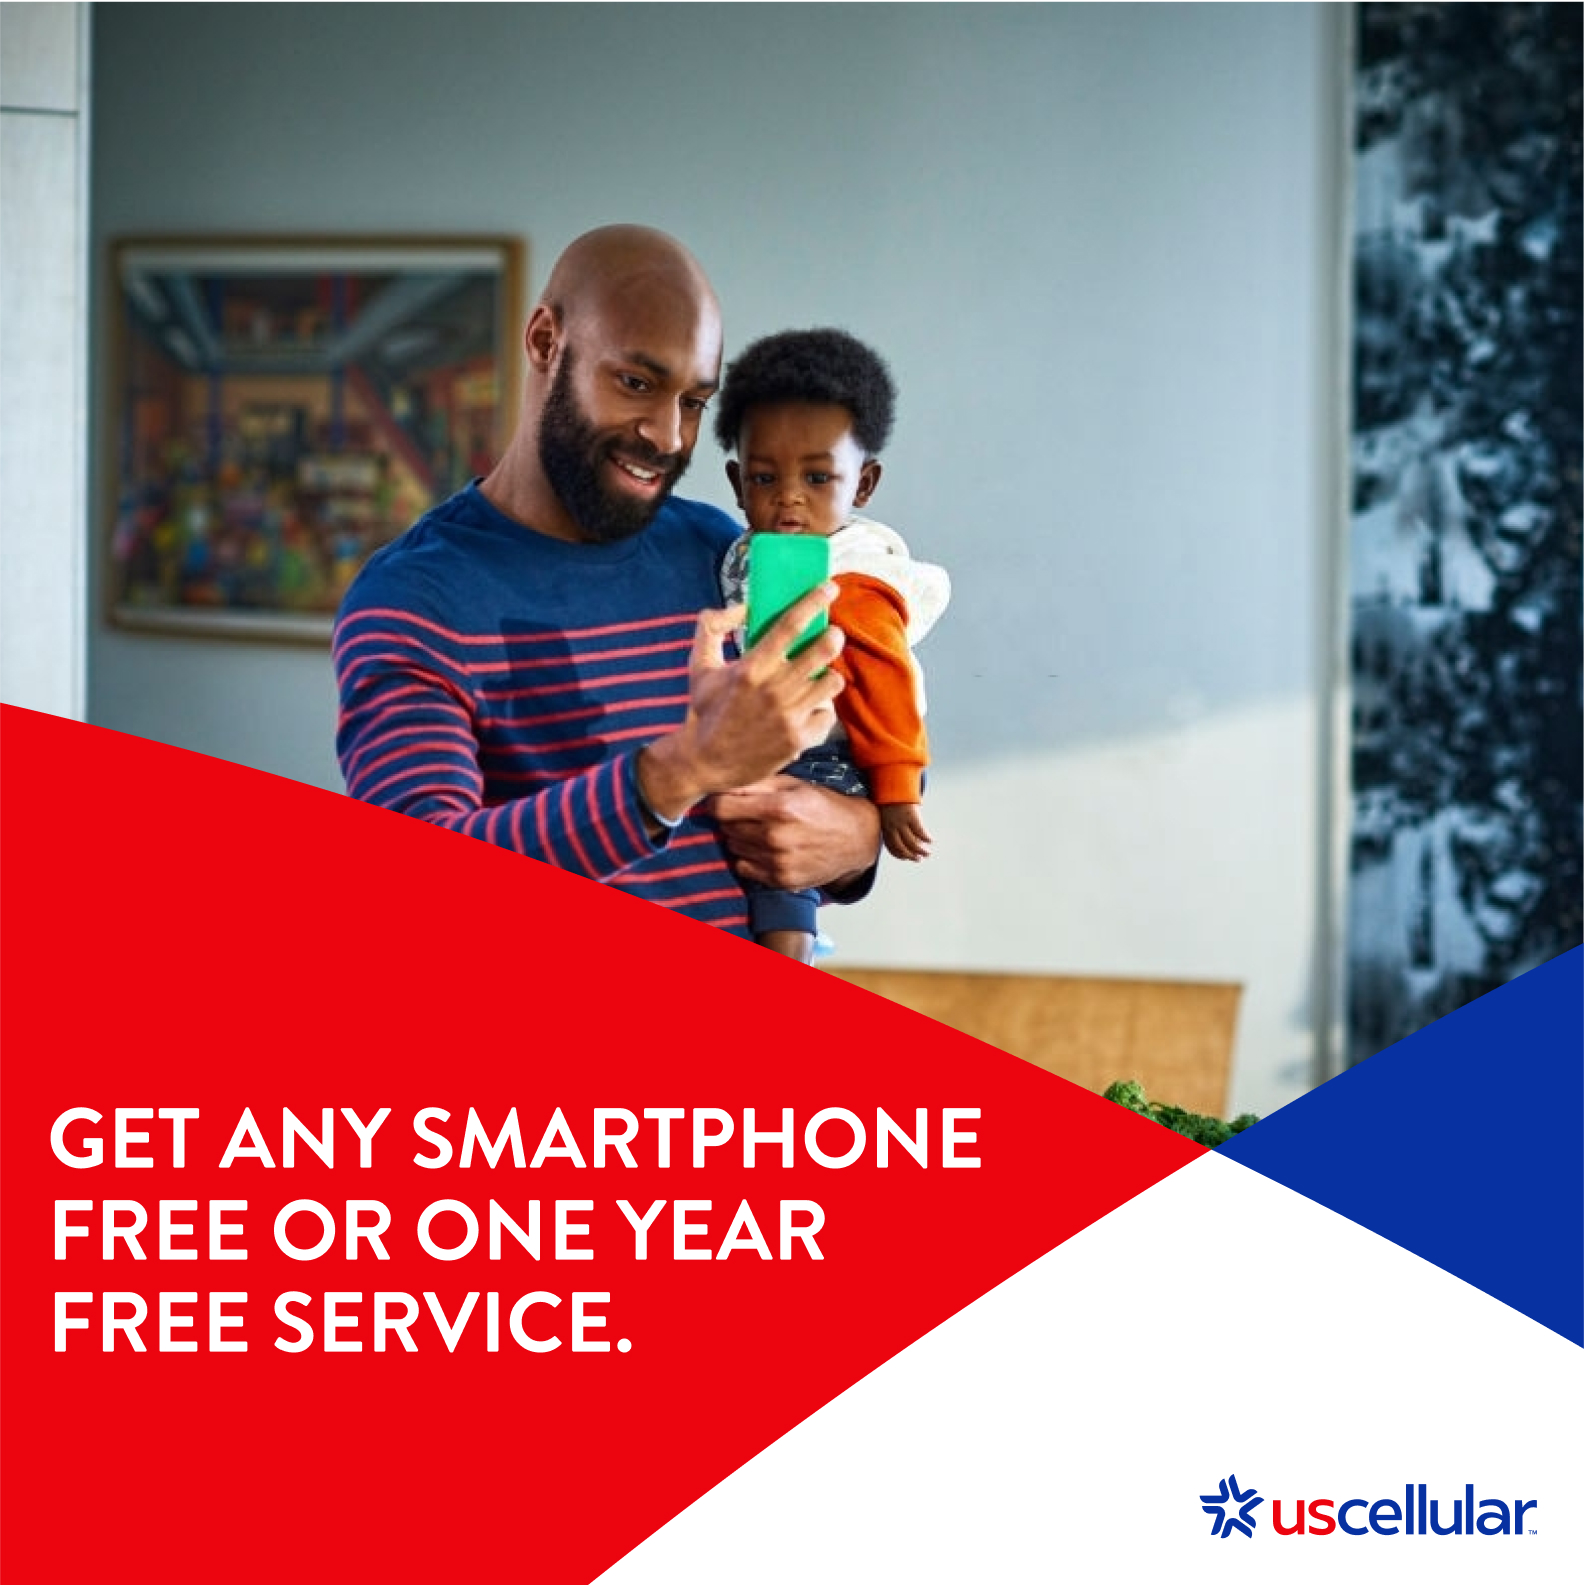 November 2021 – Choose any phone ANY brand FREE plus Unlimited Data $30/mo. with 4 lines or One year of free service – 11/11/2021 - 06/30/22